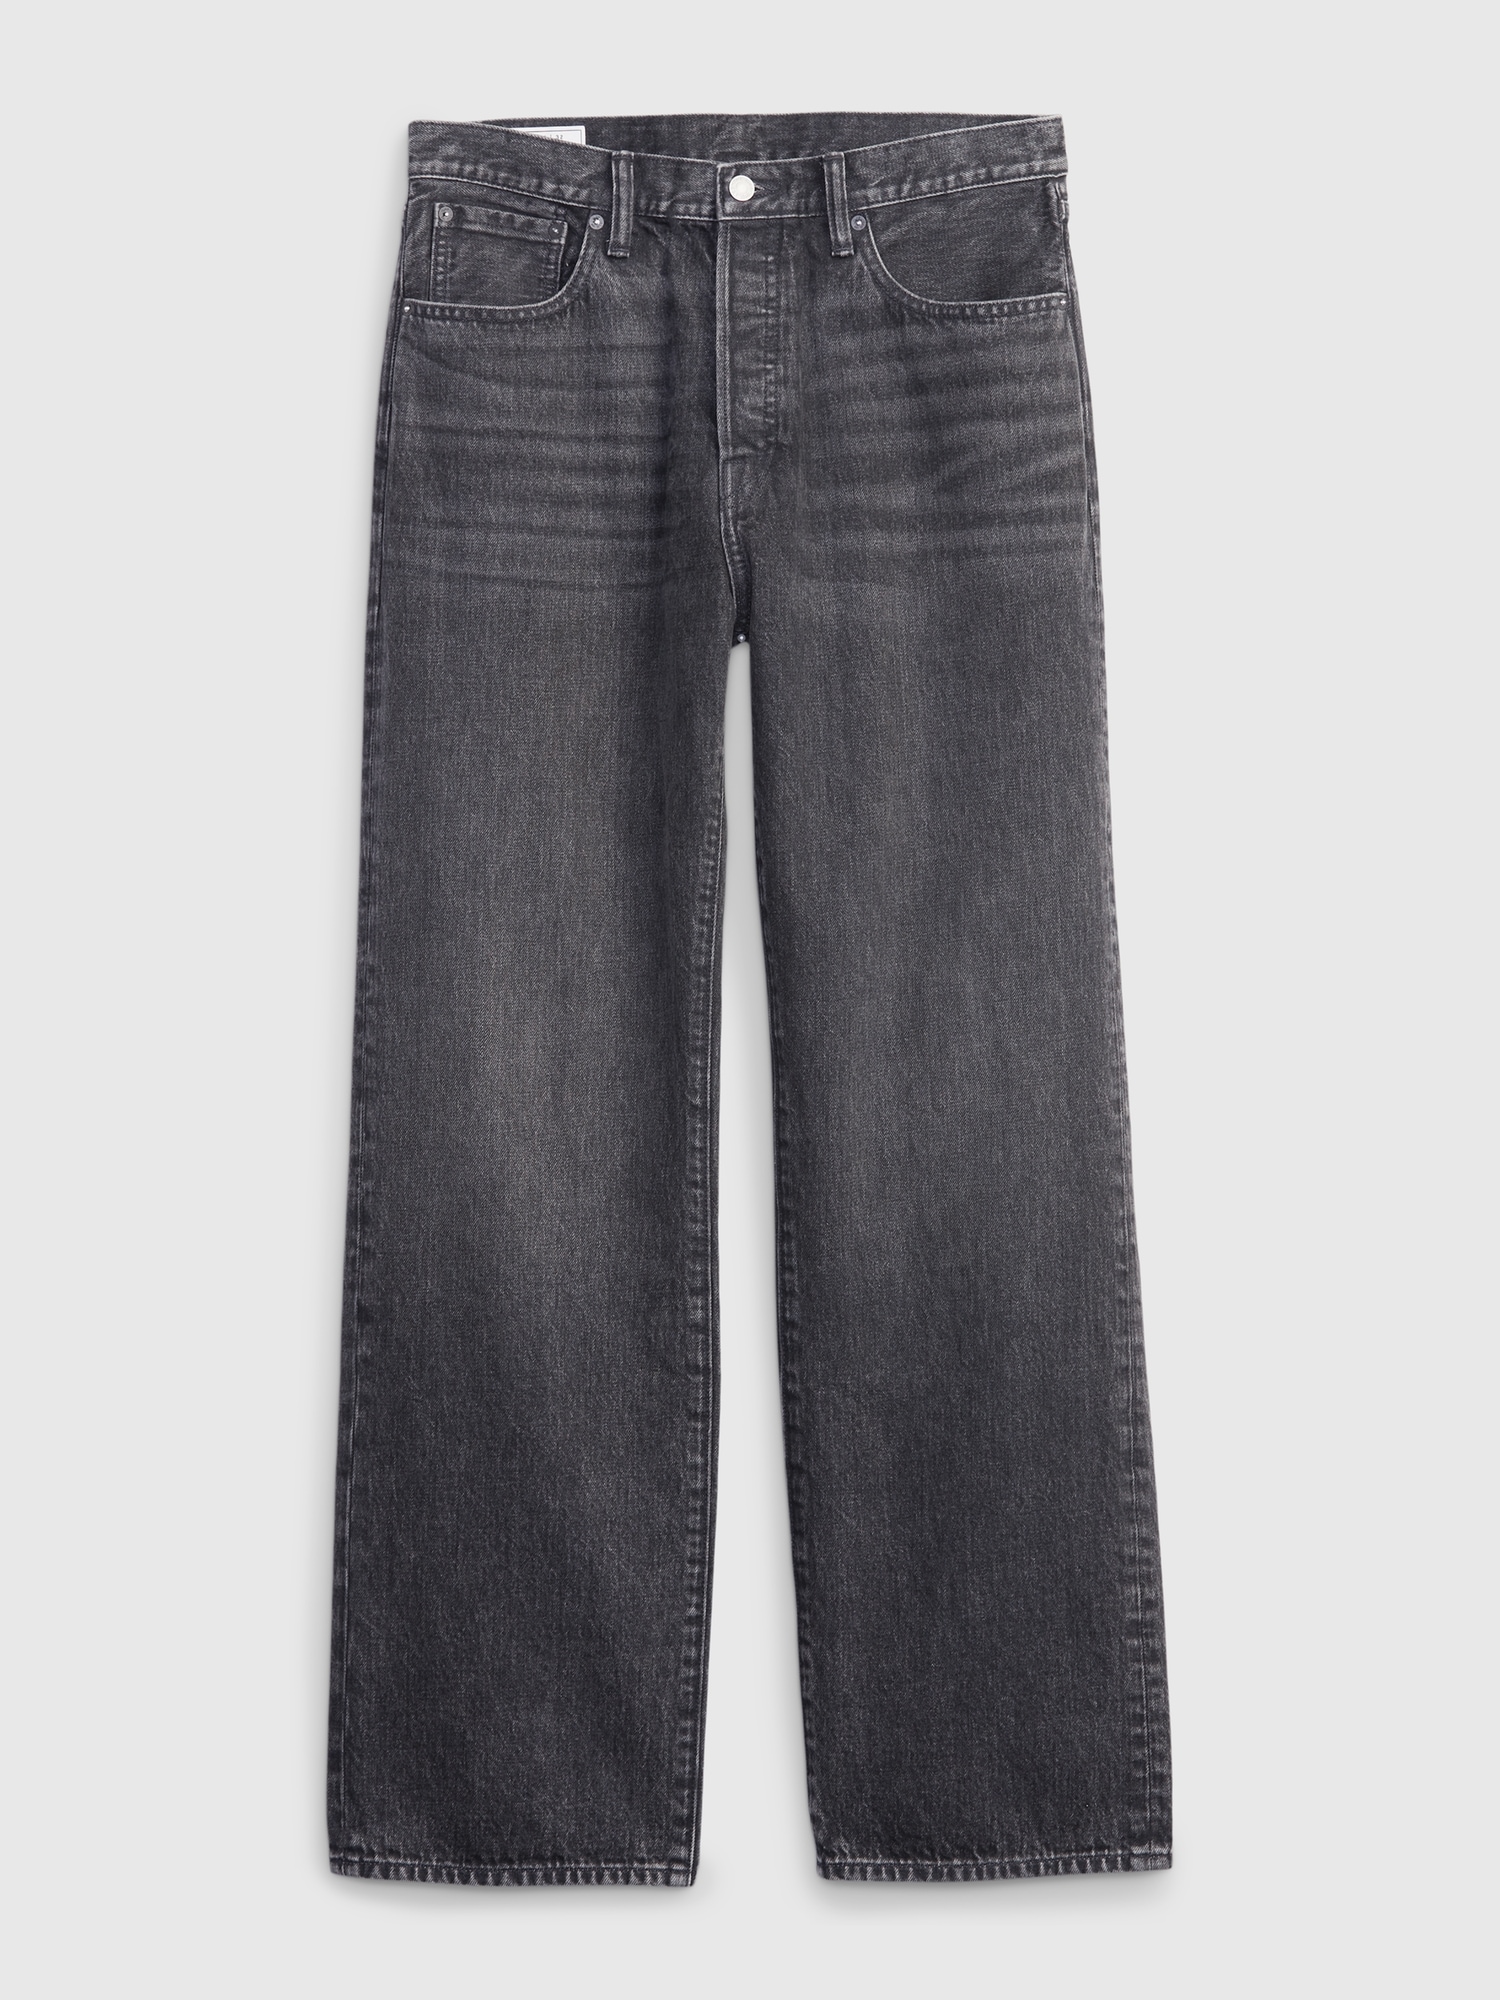 Men's Organic Cotton '90s Loose Jeans by Gap Washed Black Size 34W